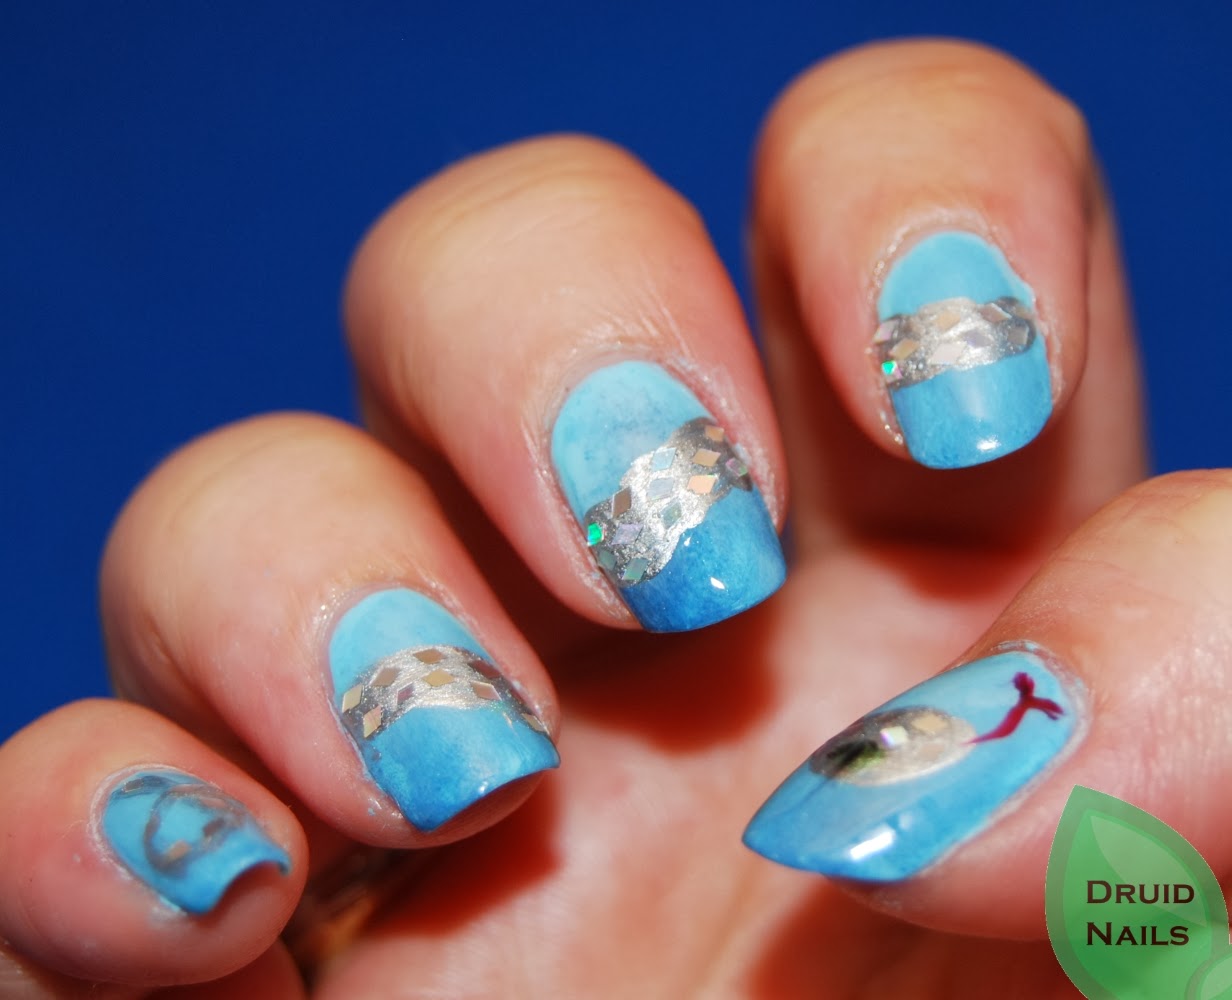 Druid Nails: 33DC2013 Day 13 - Chinese